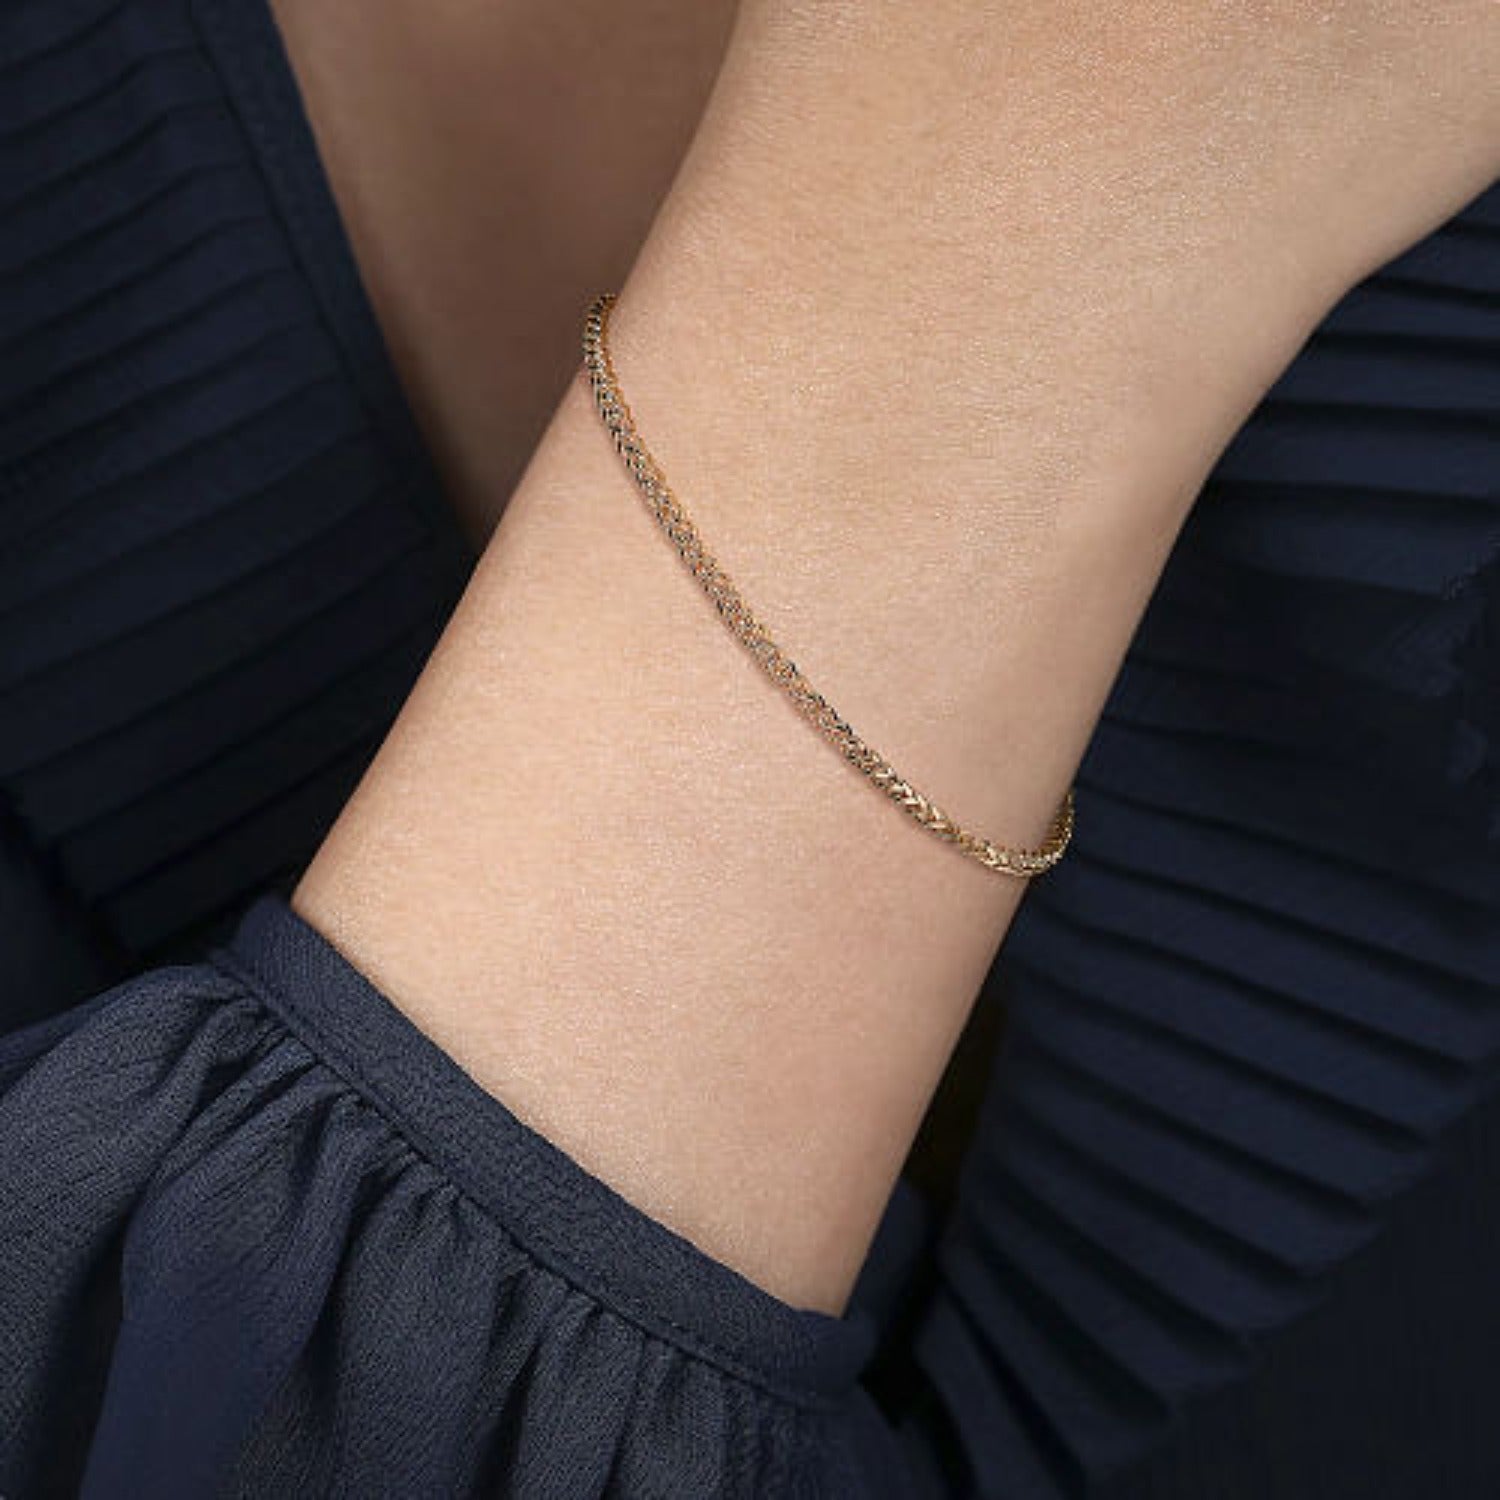 Buy Rose Gold Chain Bracelet Thin Chain Bracelet, Rose Gold Bracelet,  Simple Bracelet, Basic Plain Chain, Delicate Bracelet, Thin Bracelet Online  in India - Etsy